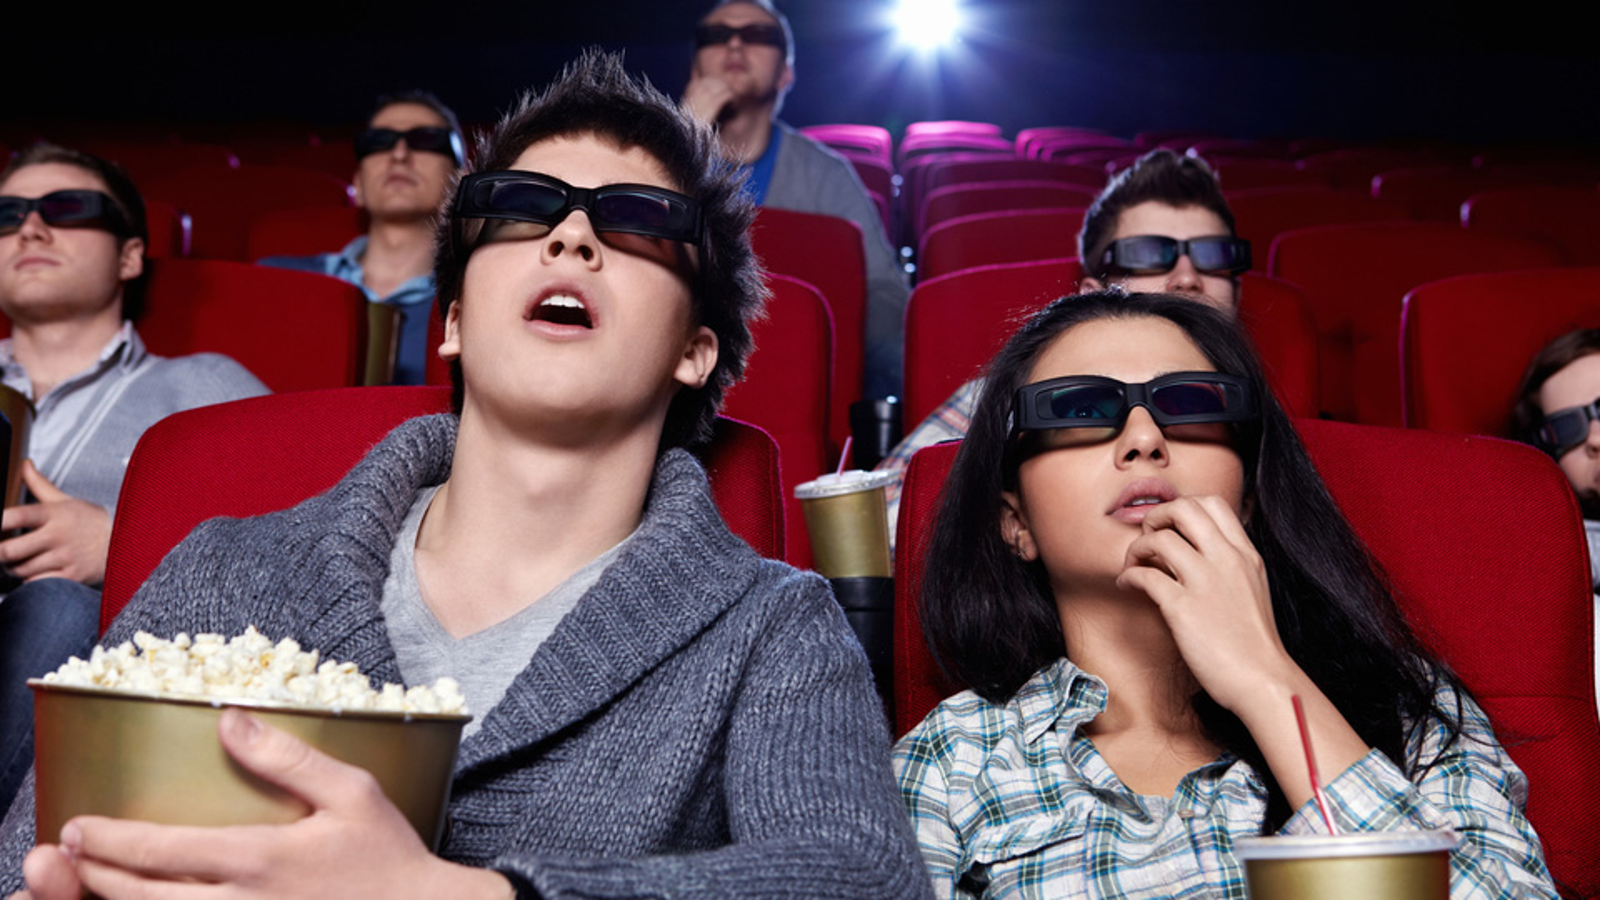 4d movies theaters location